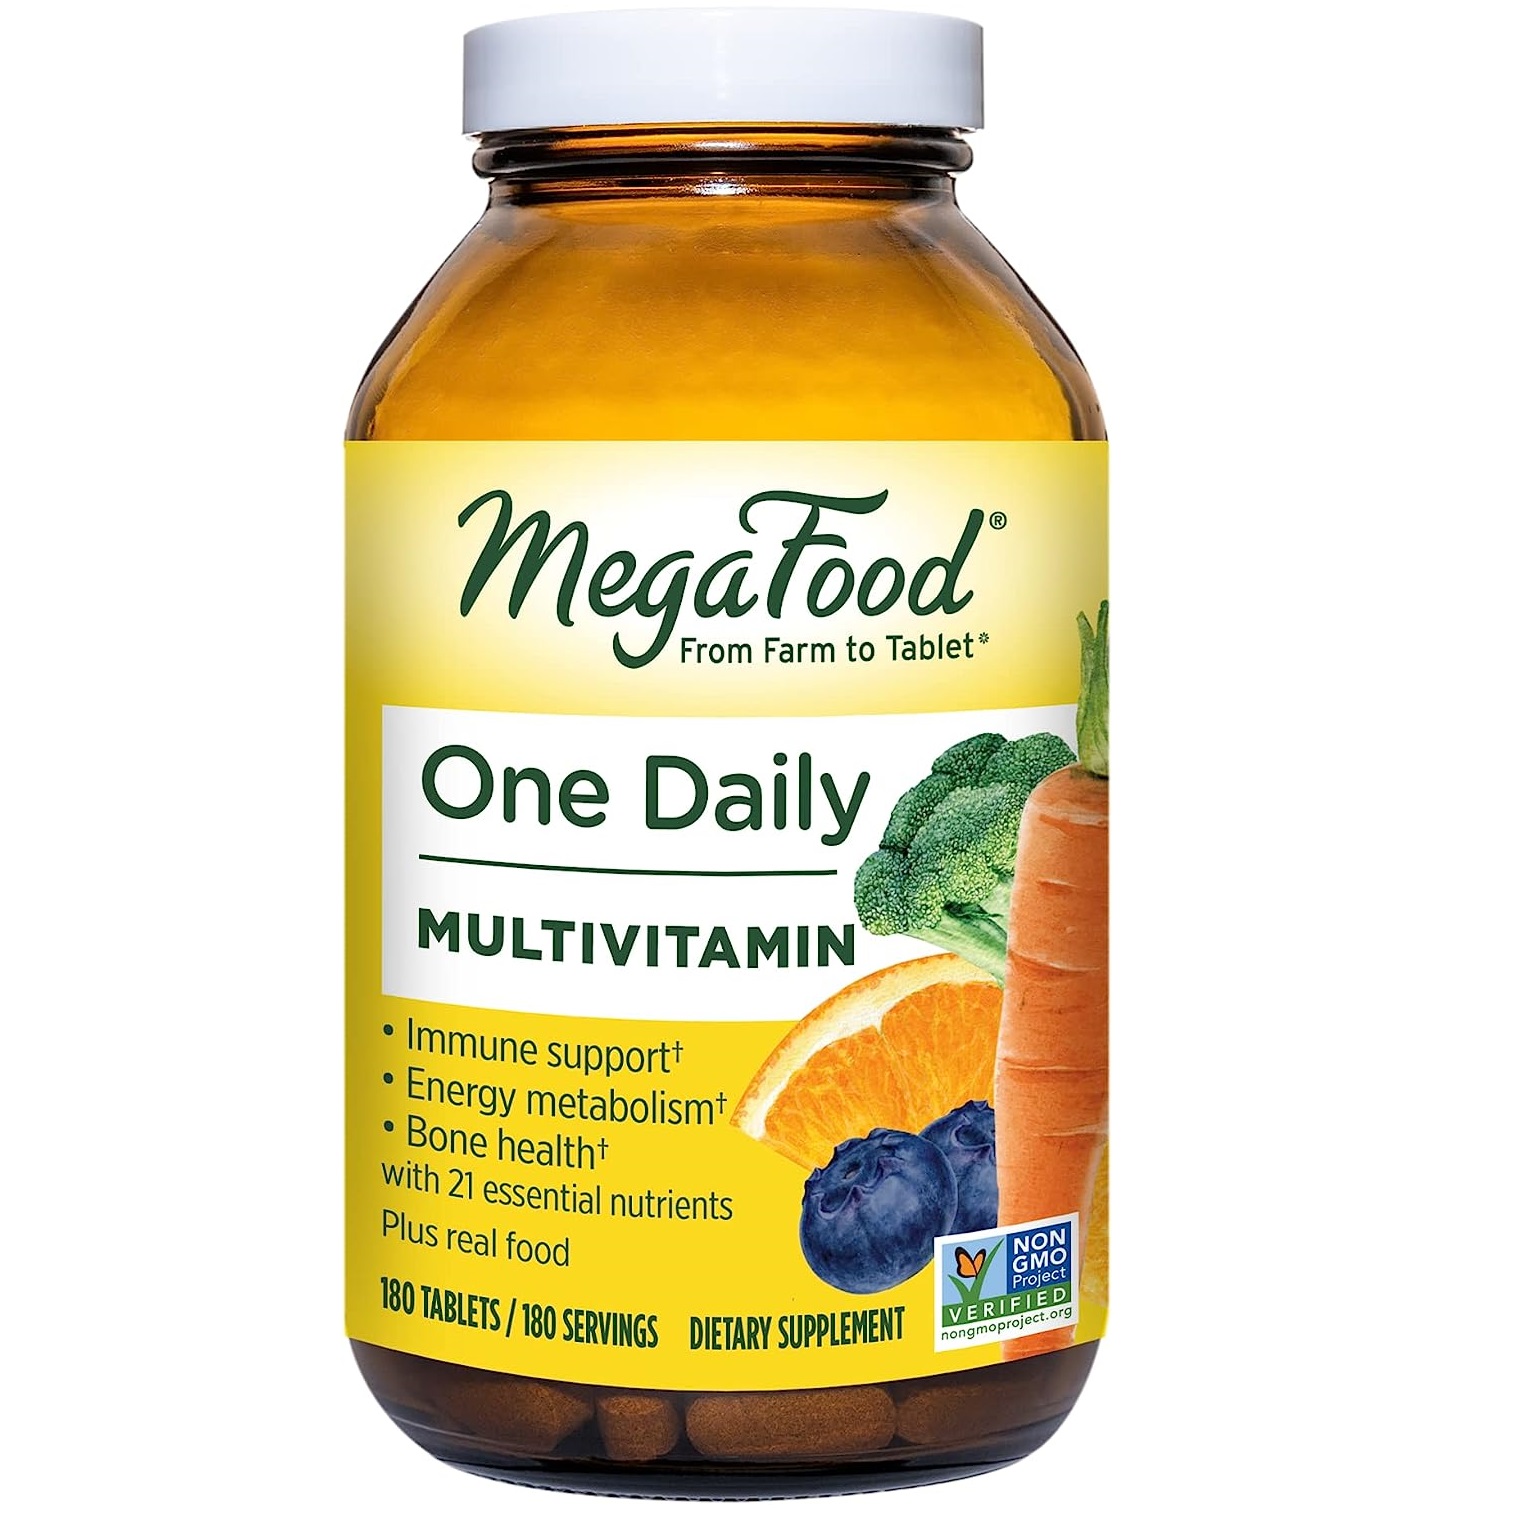 MegaFood-One-Daily-Multivitamin